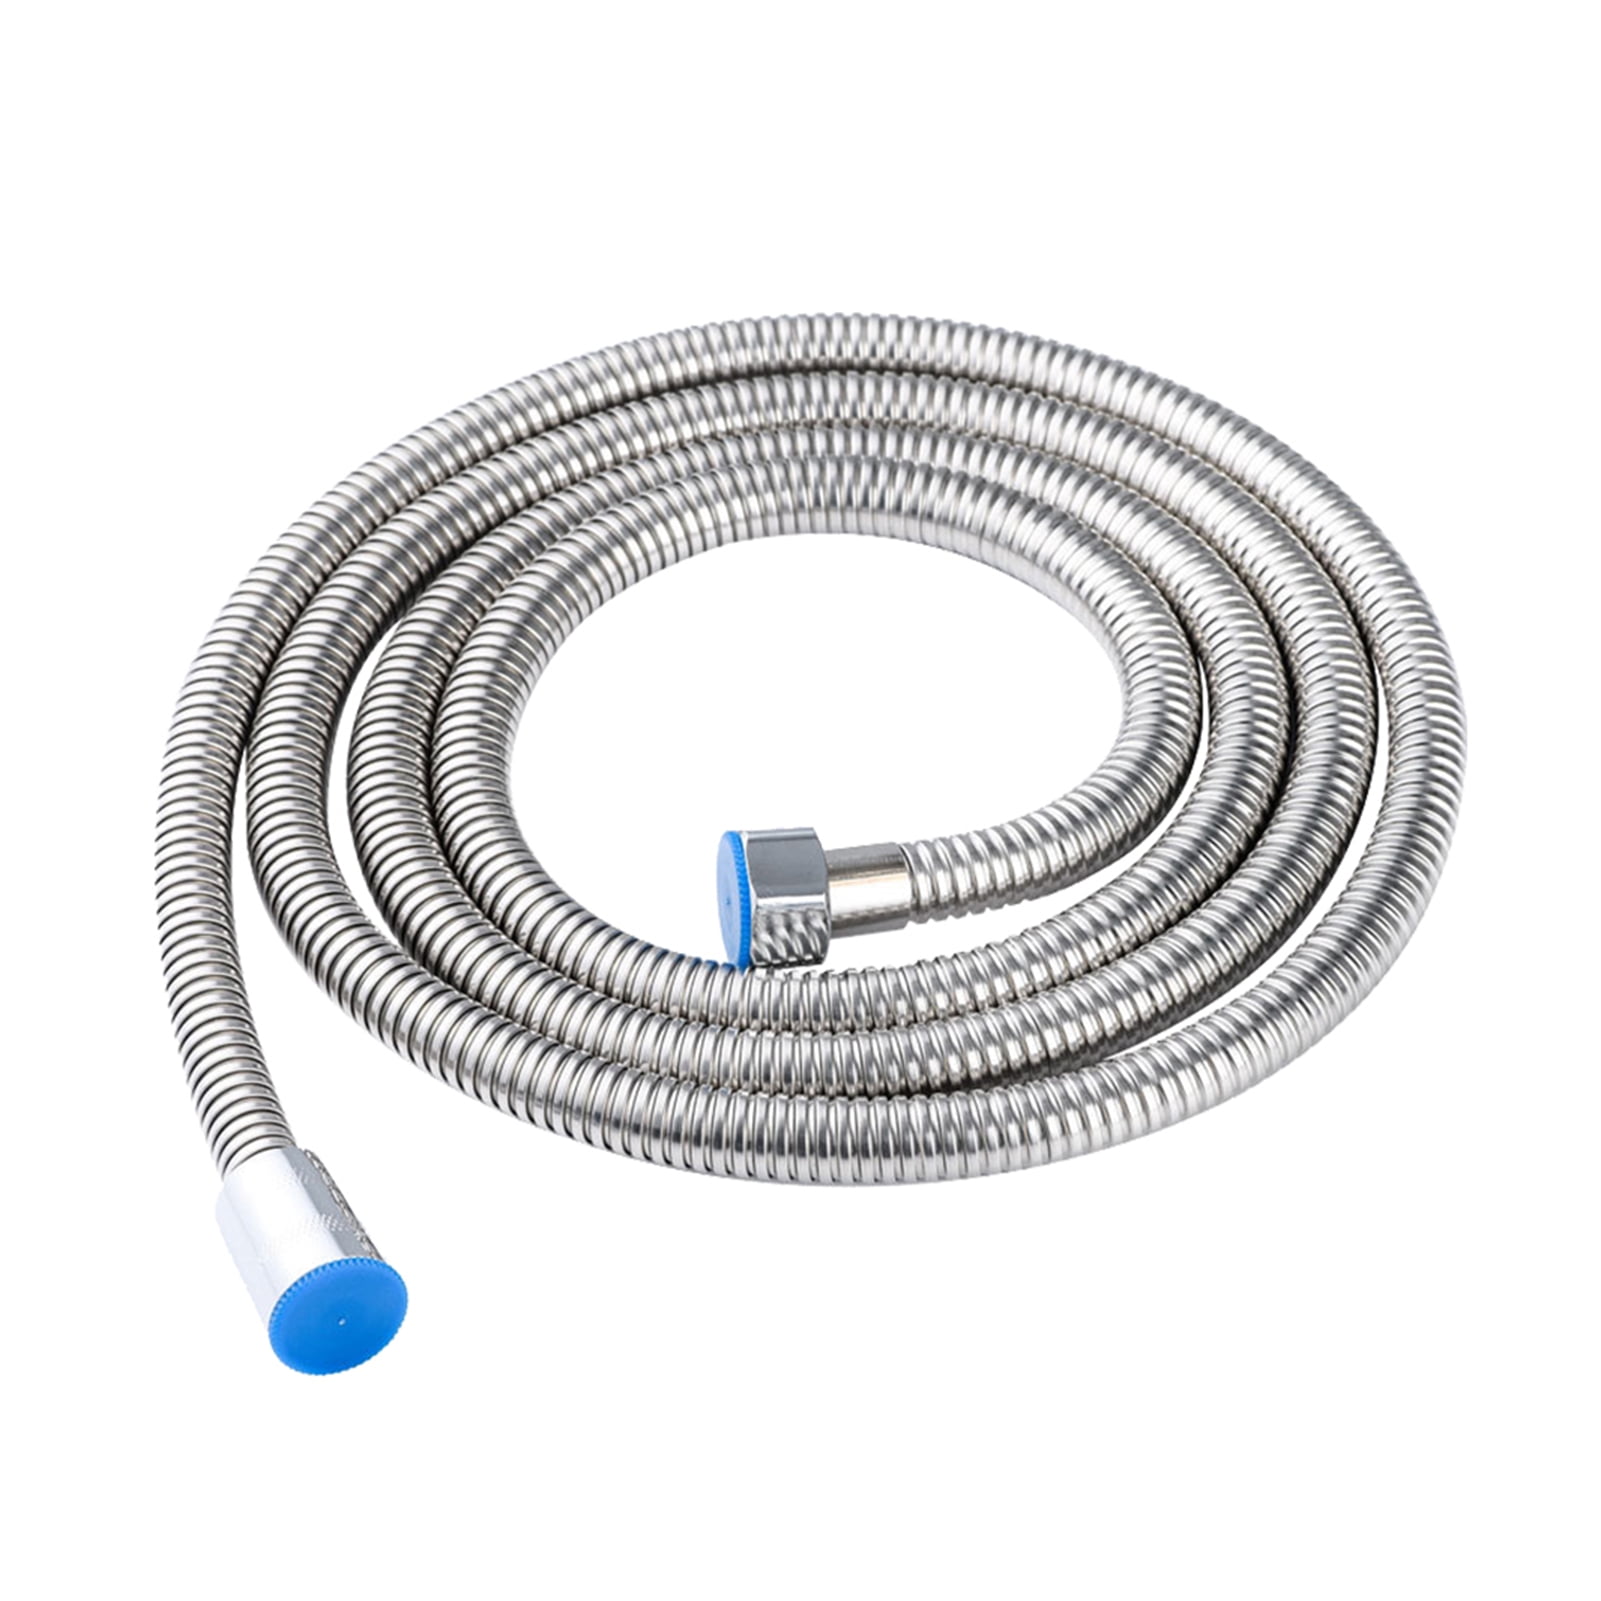 3m Stainless Steel Flexible Shower Hose Bathroom Water Heater Hoses Replace Pipe 